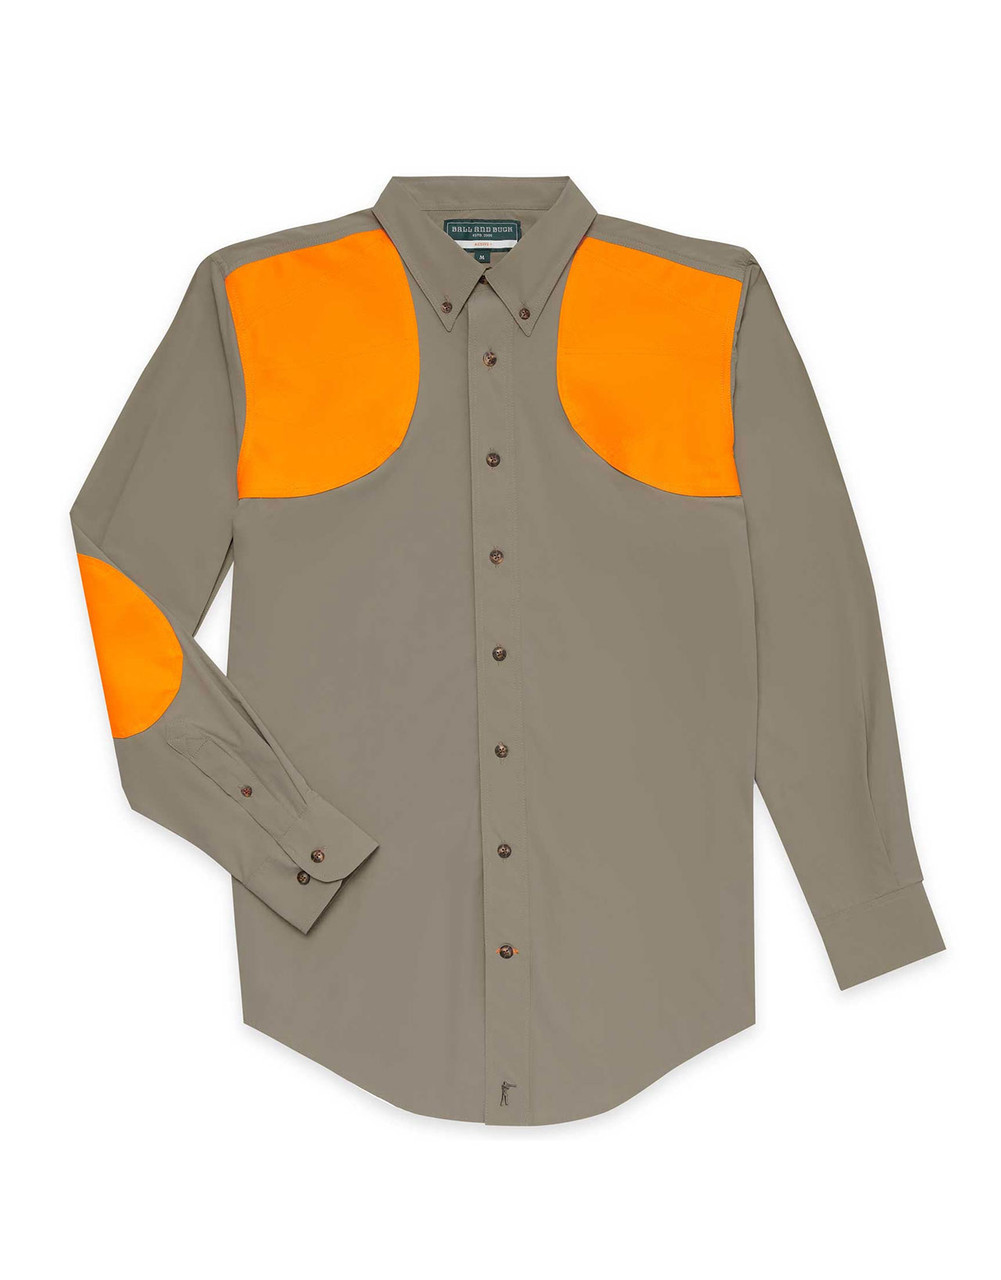 Active+ Field Shirt - Rivers & Glen Trading Co.